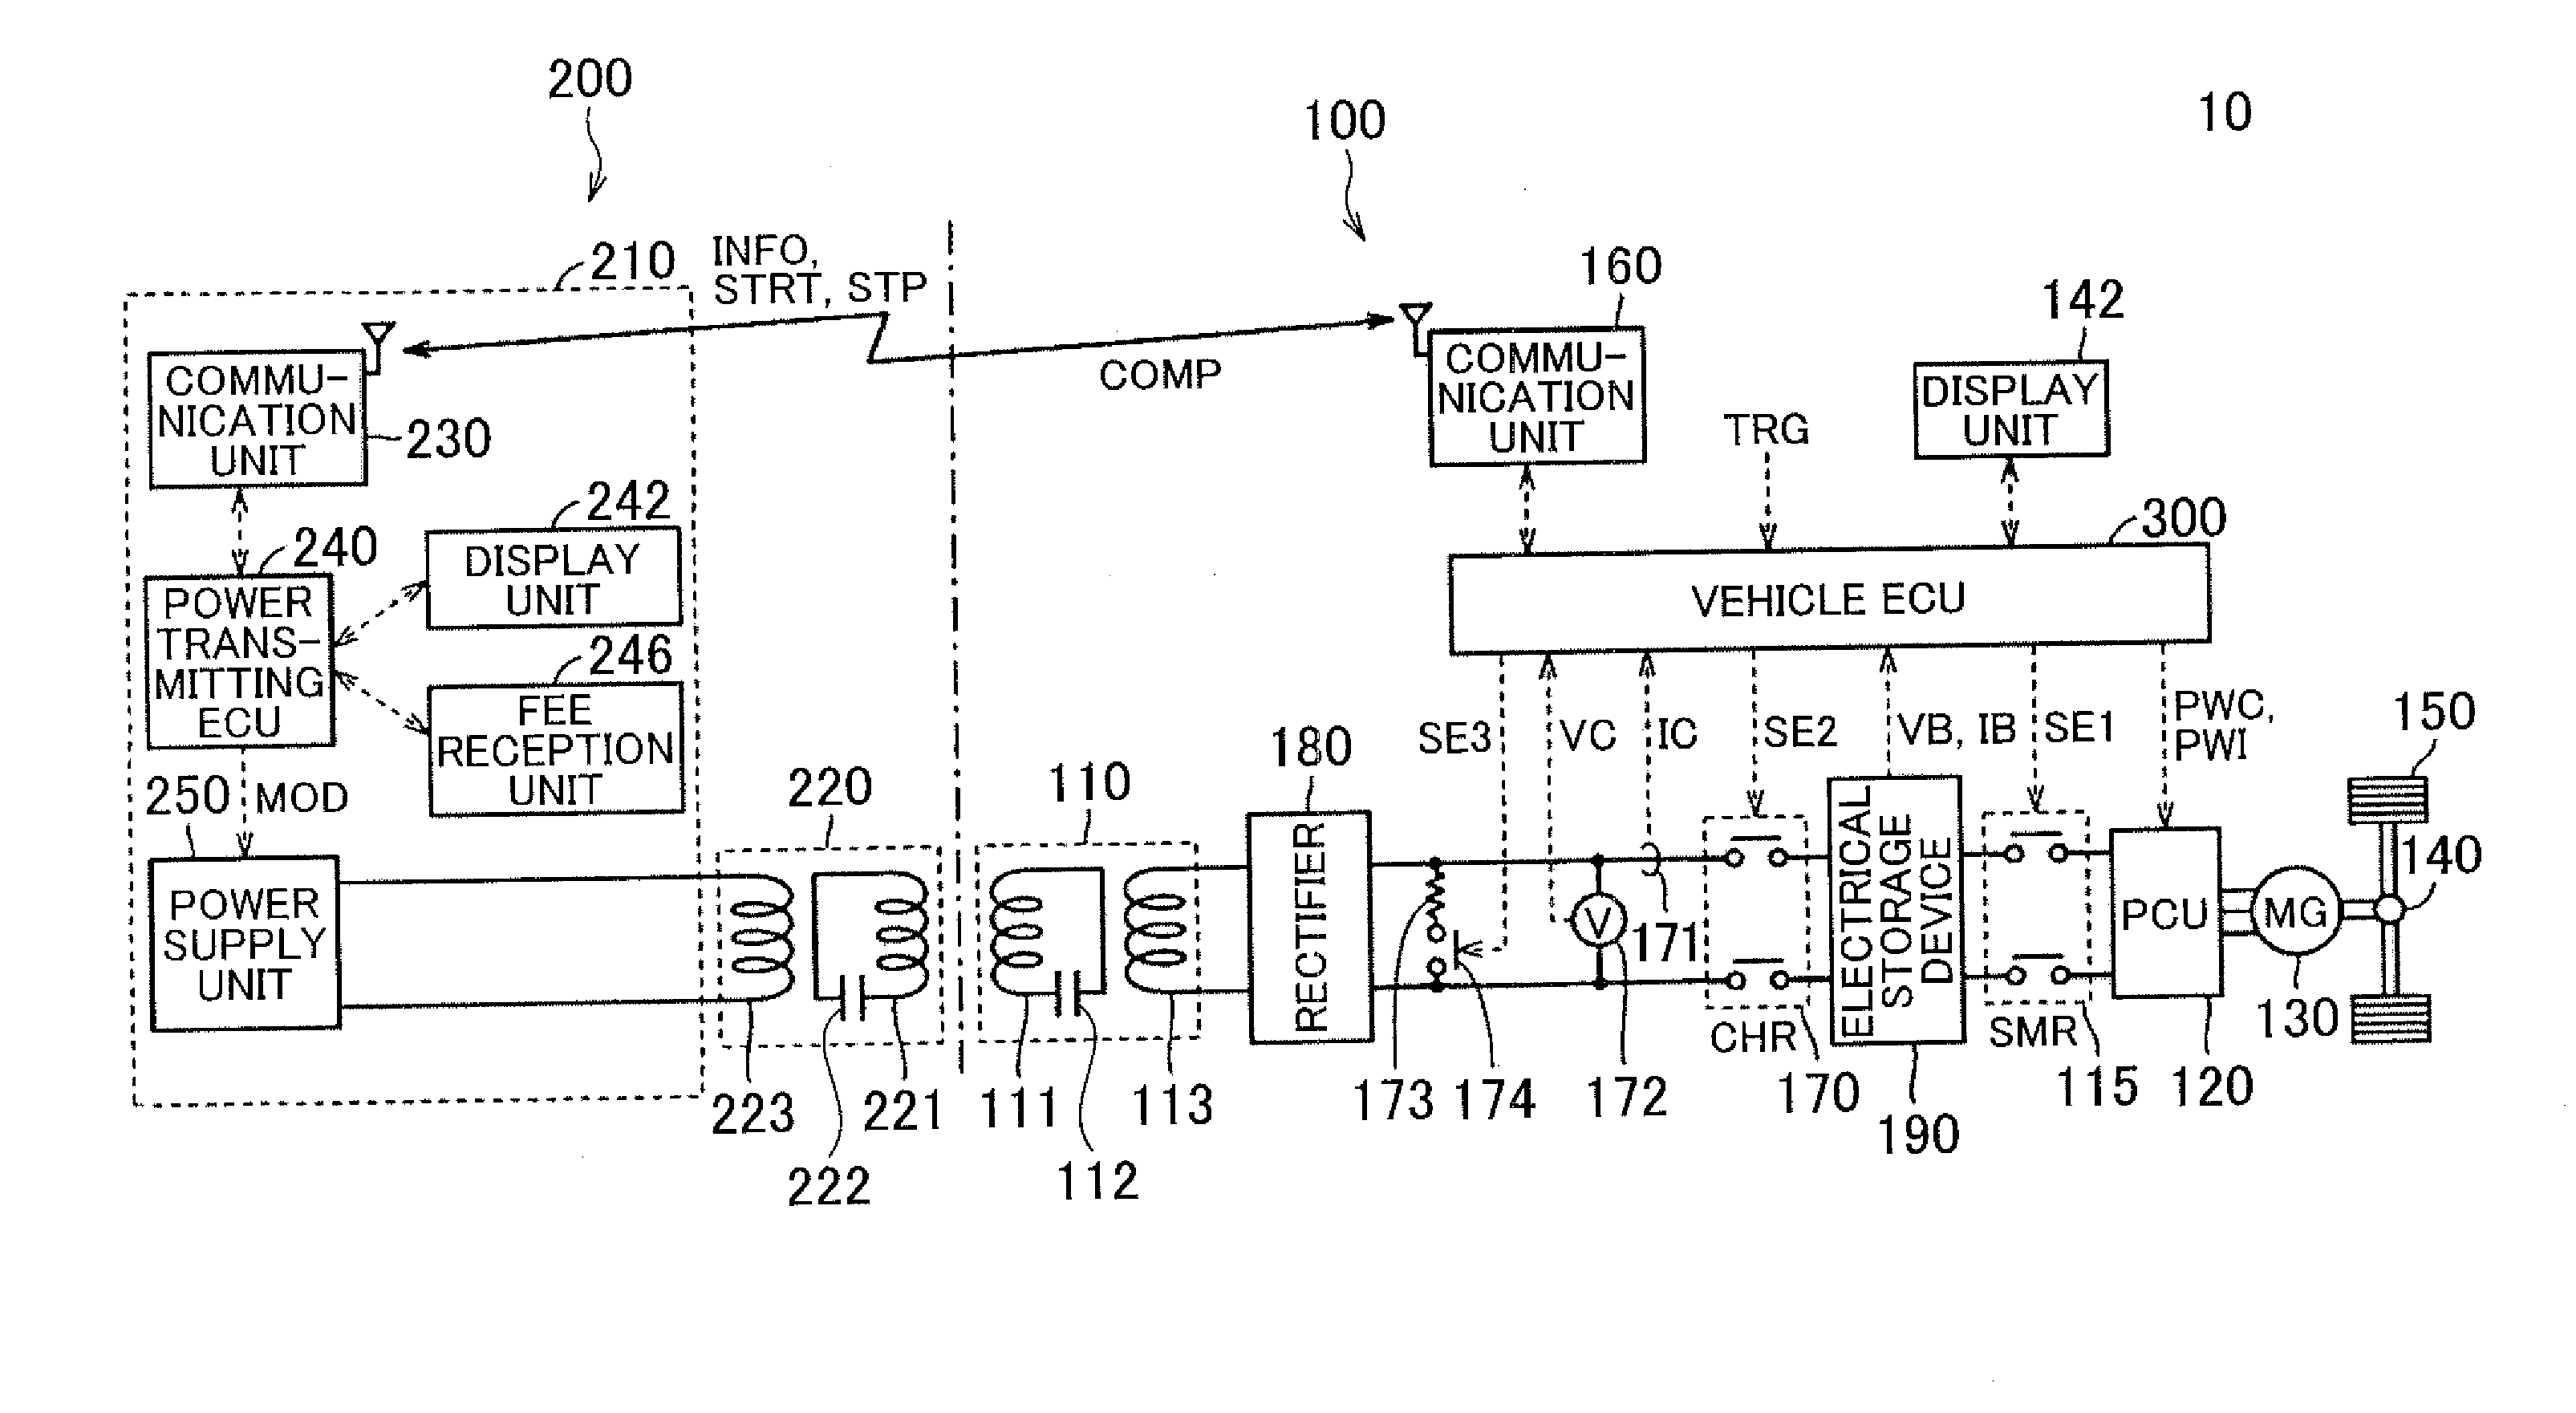 Contactless power transmitting device, contactless power receiving device, and contactless power transfer system